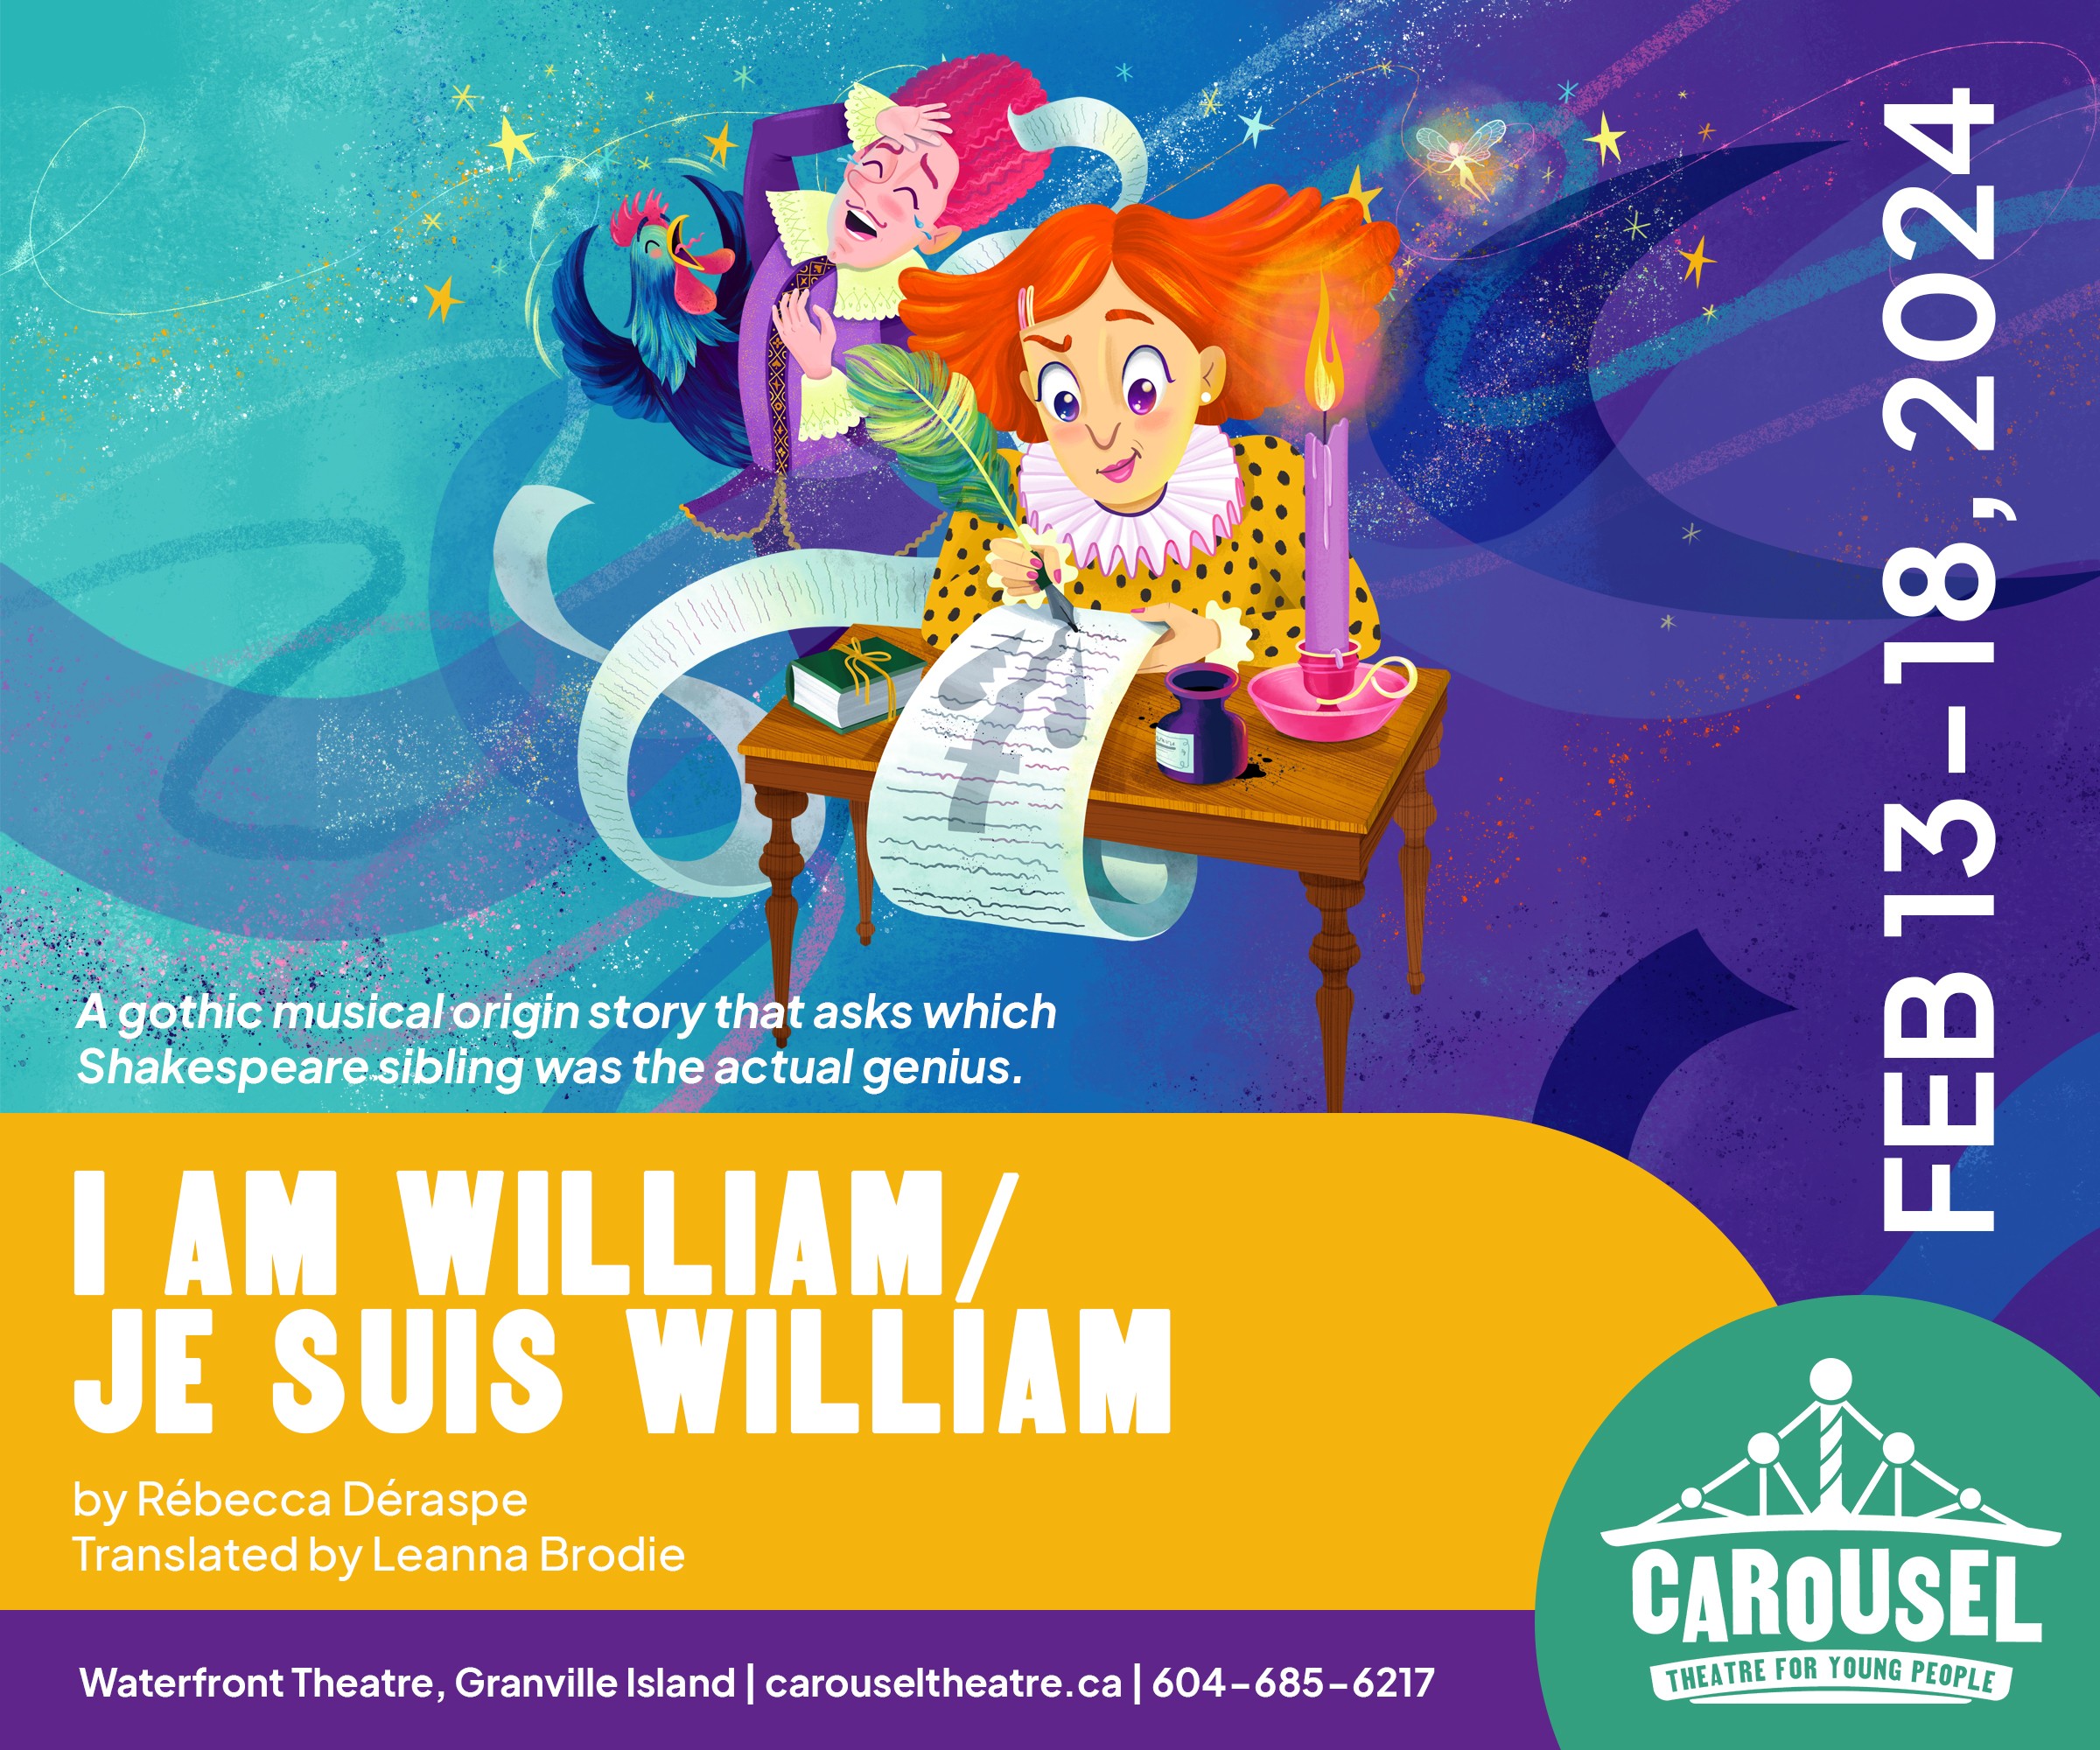 Carousel Theatre for Young People's presentation of "I Am William"